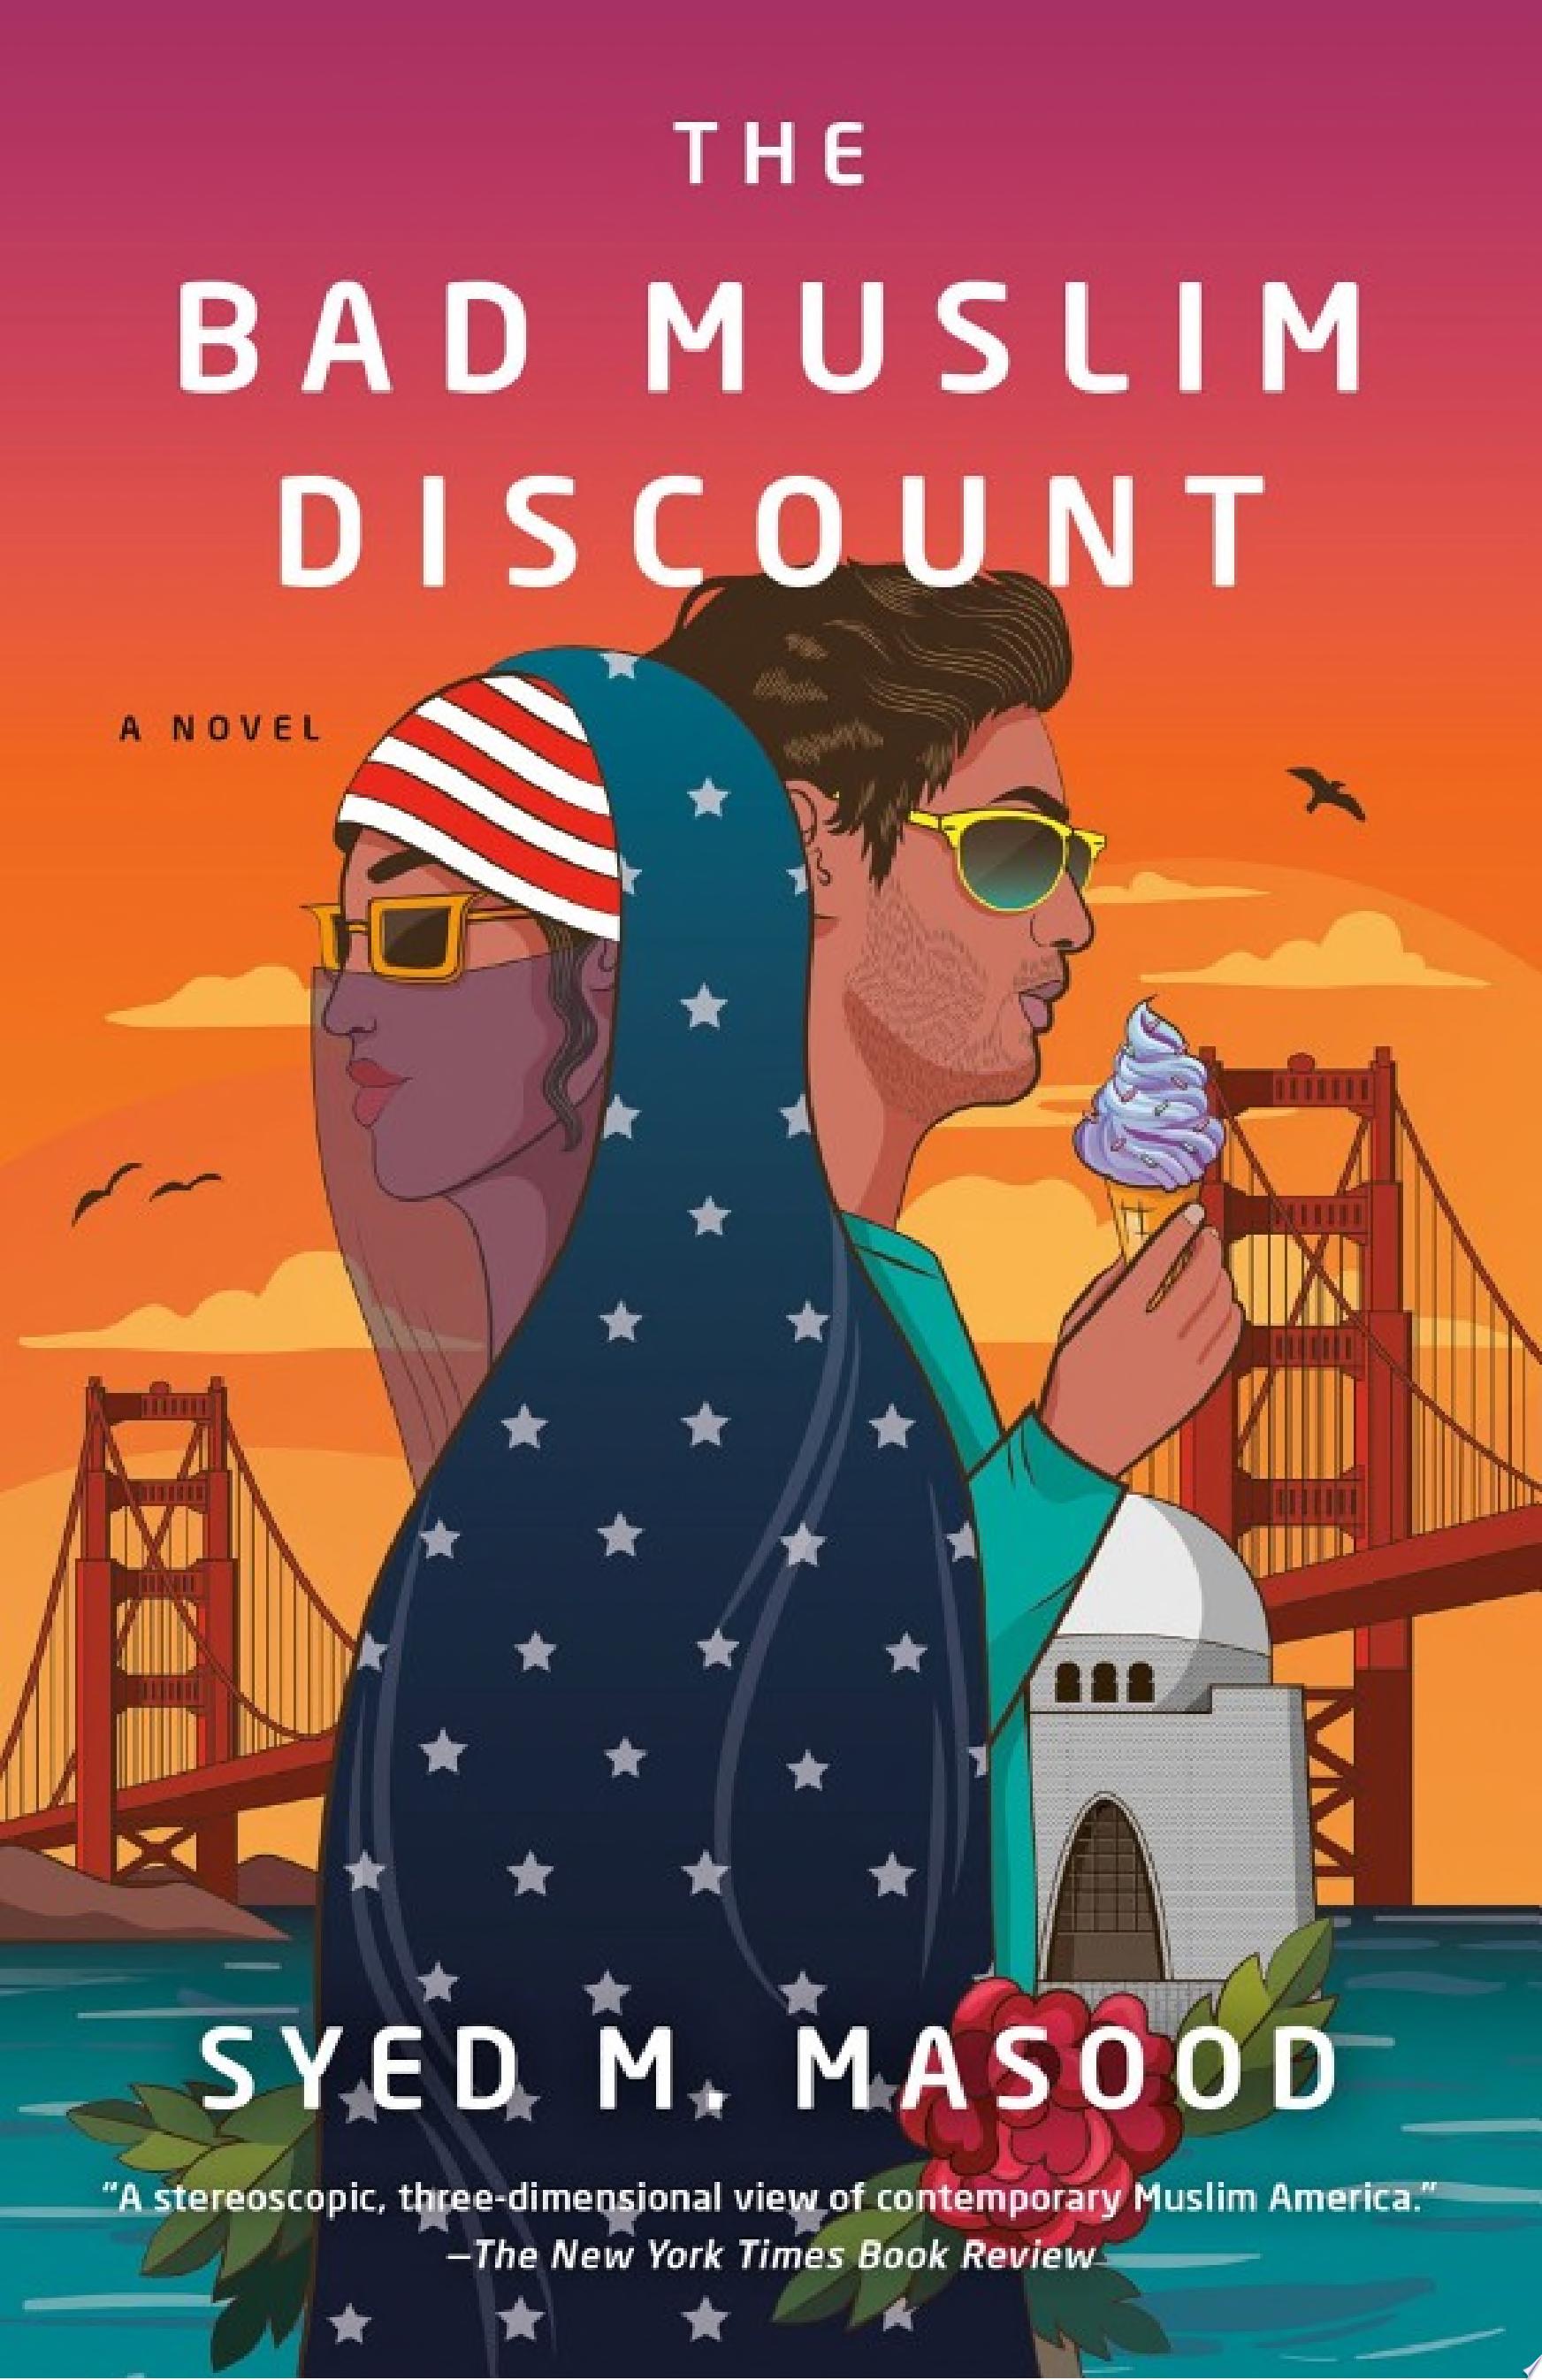 Image for "The Bad Muslim Discount"